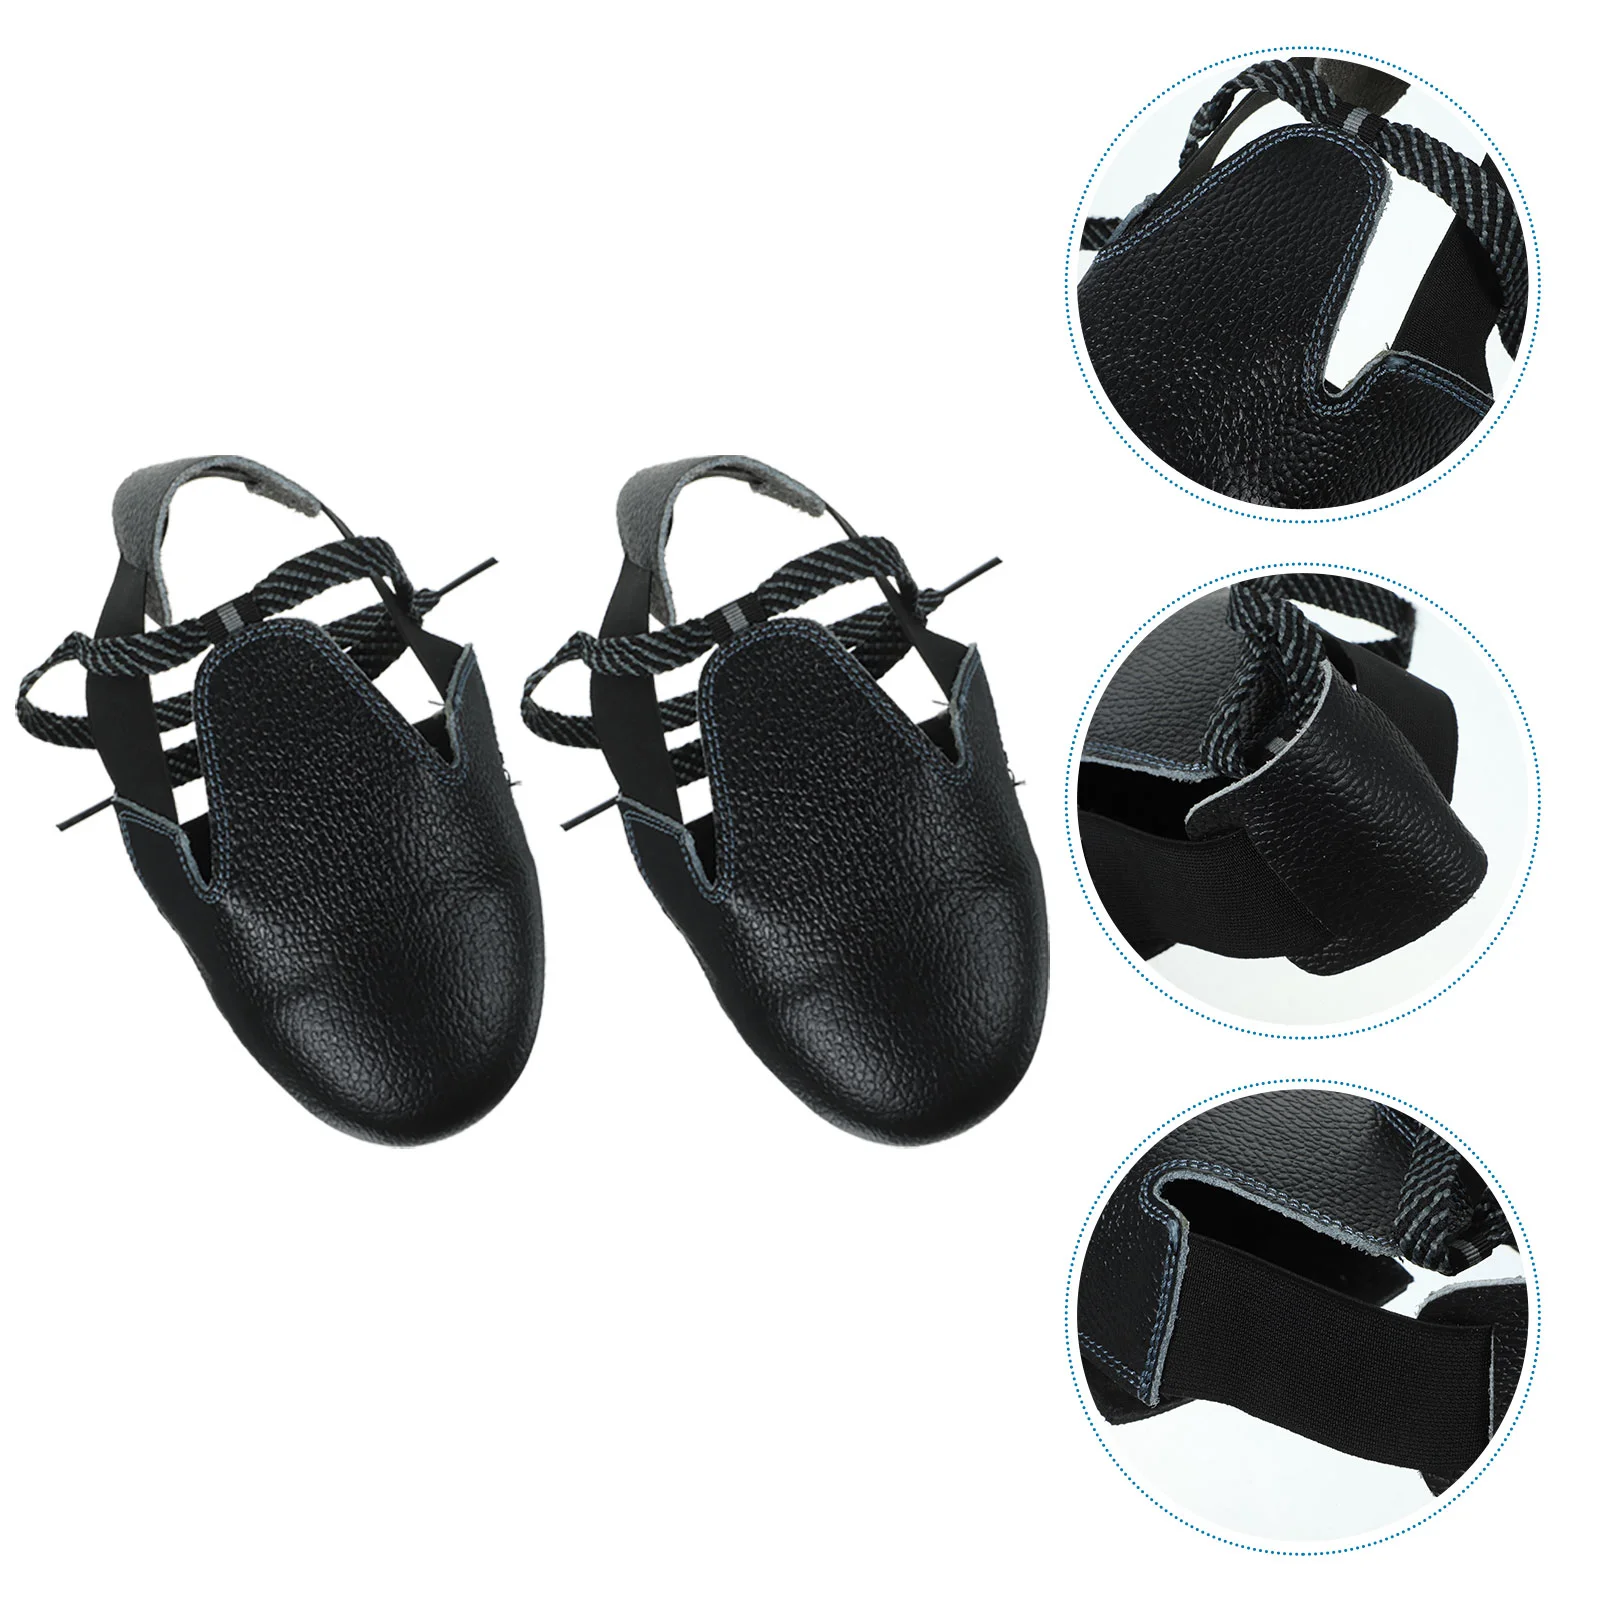 

Anti-Smashing Safety Shoes Covers Safety Overshoes Toe Protective Slip-resistan Industry Workplace for Size EUR 36-46